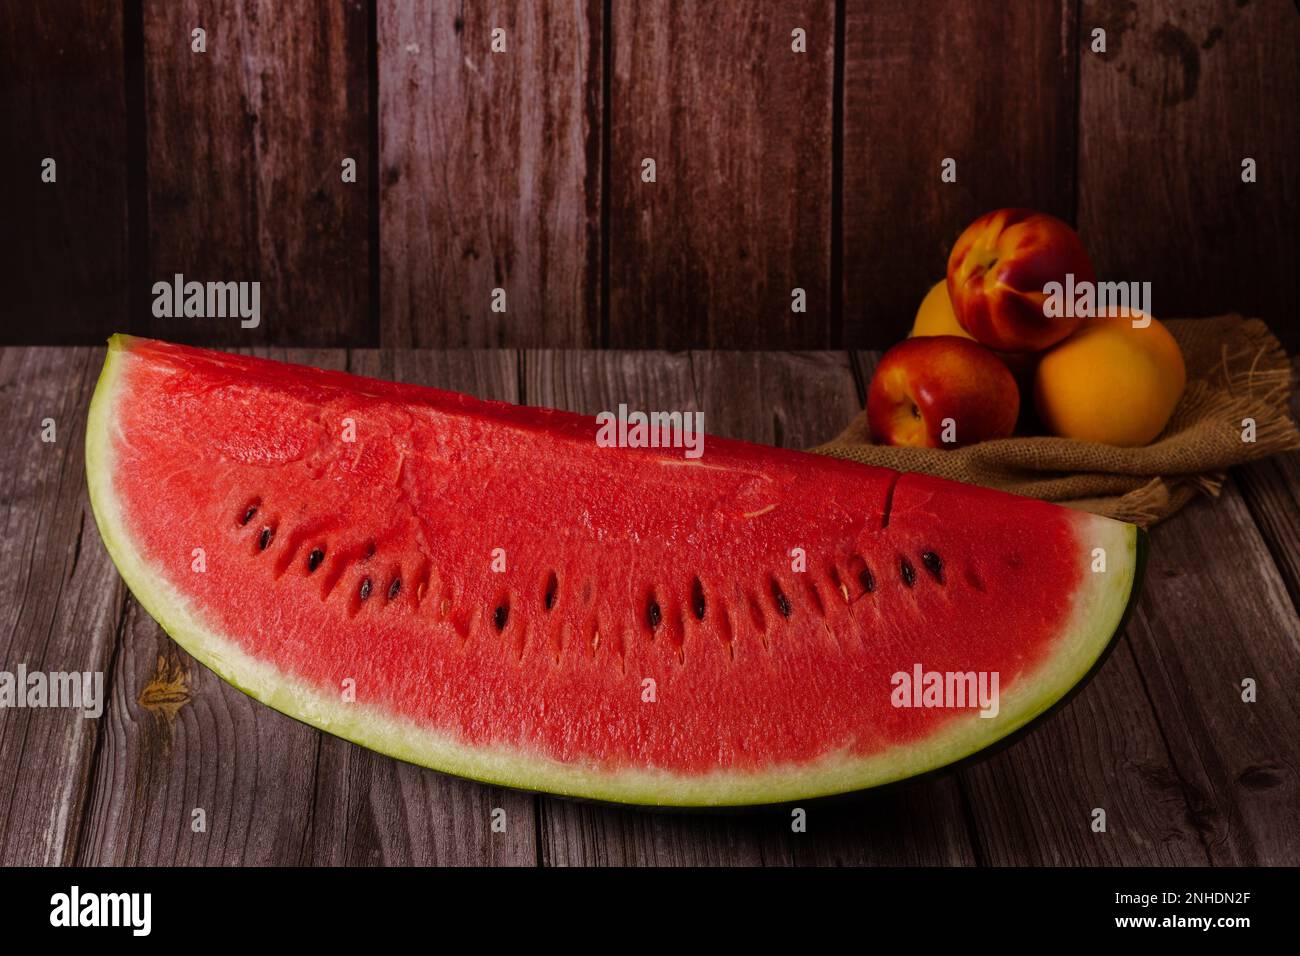 Close-up of a portion of fresh watermelon with fruit on a wooden table in the background Stock Photo